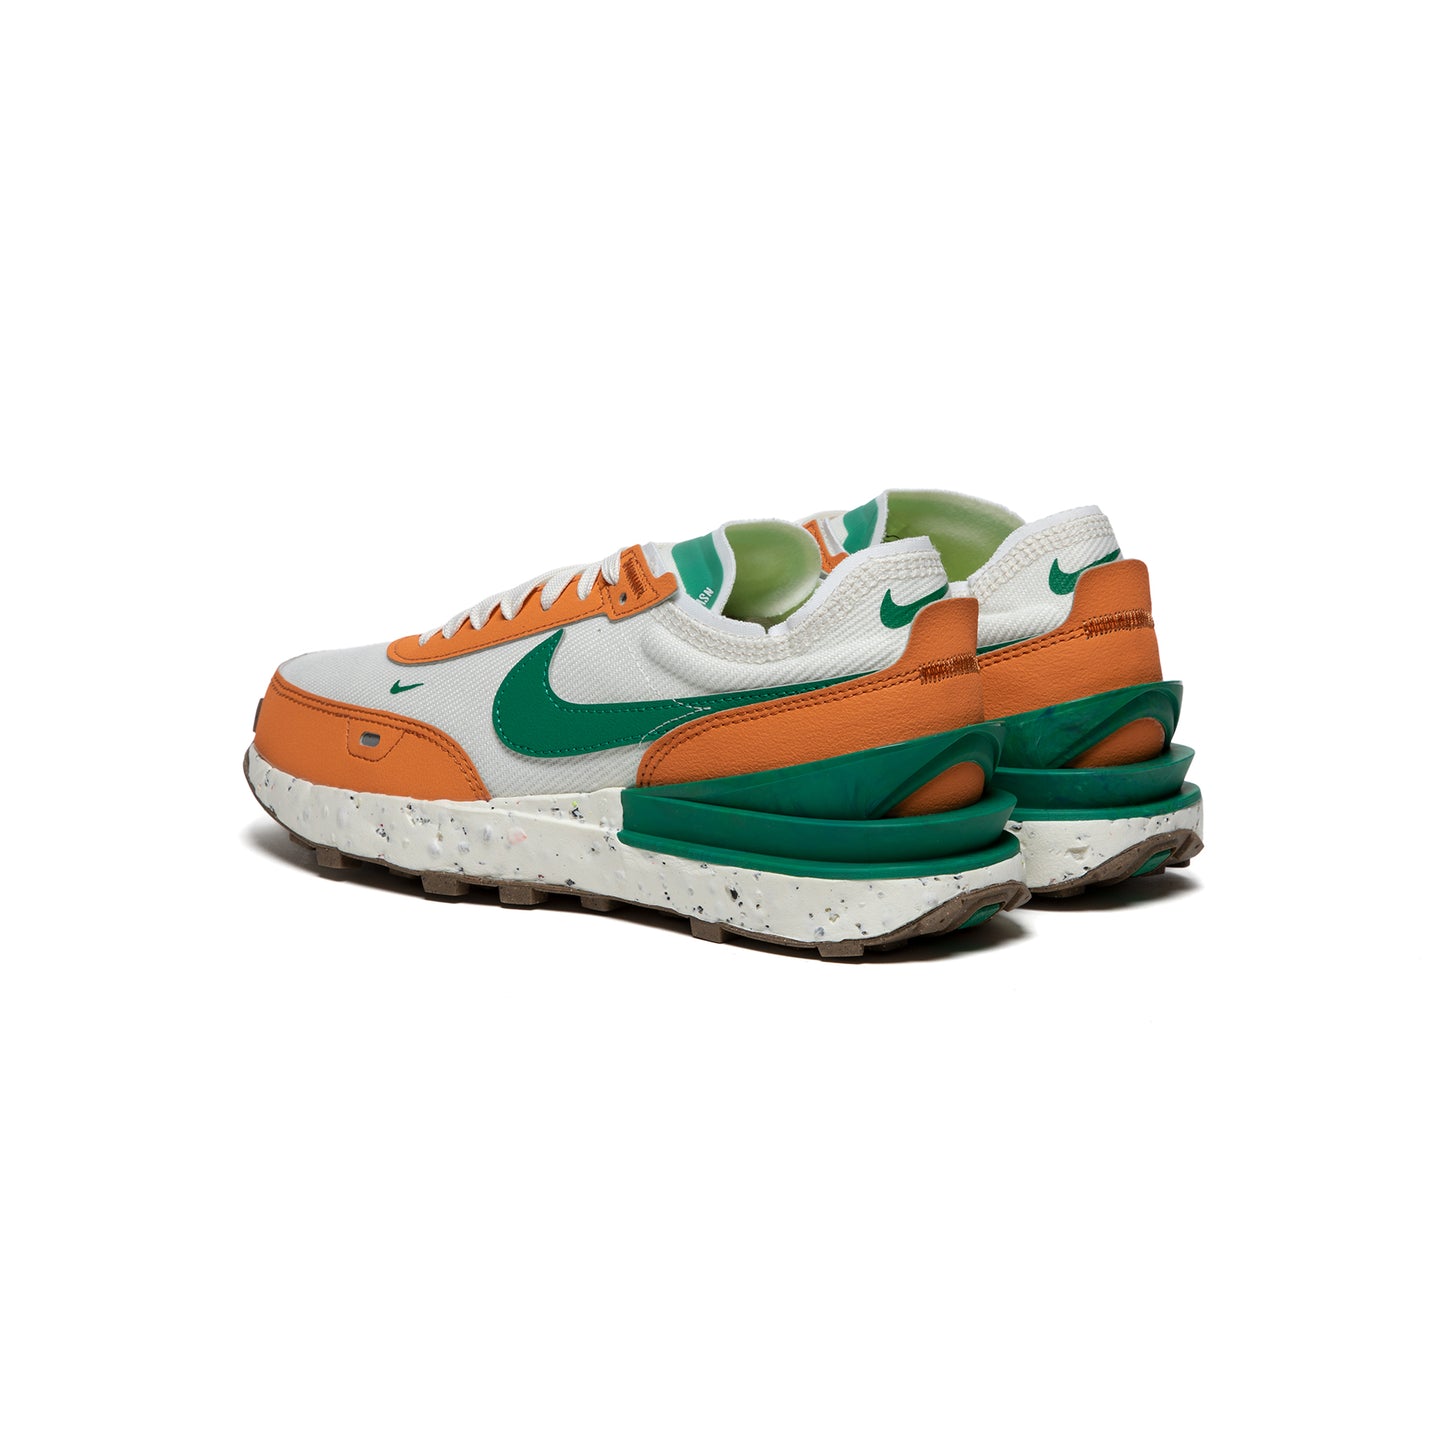 Nike Womens Waffle One Crater (Sail/Malachite/Hot Curry/Gum Med Brown)